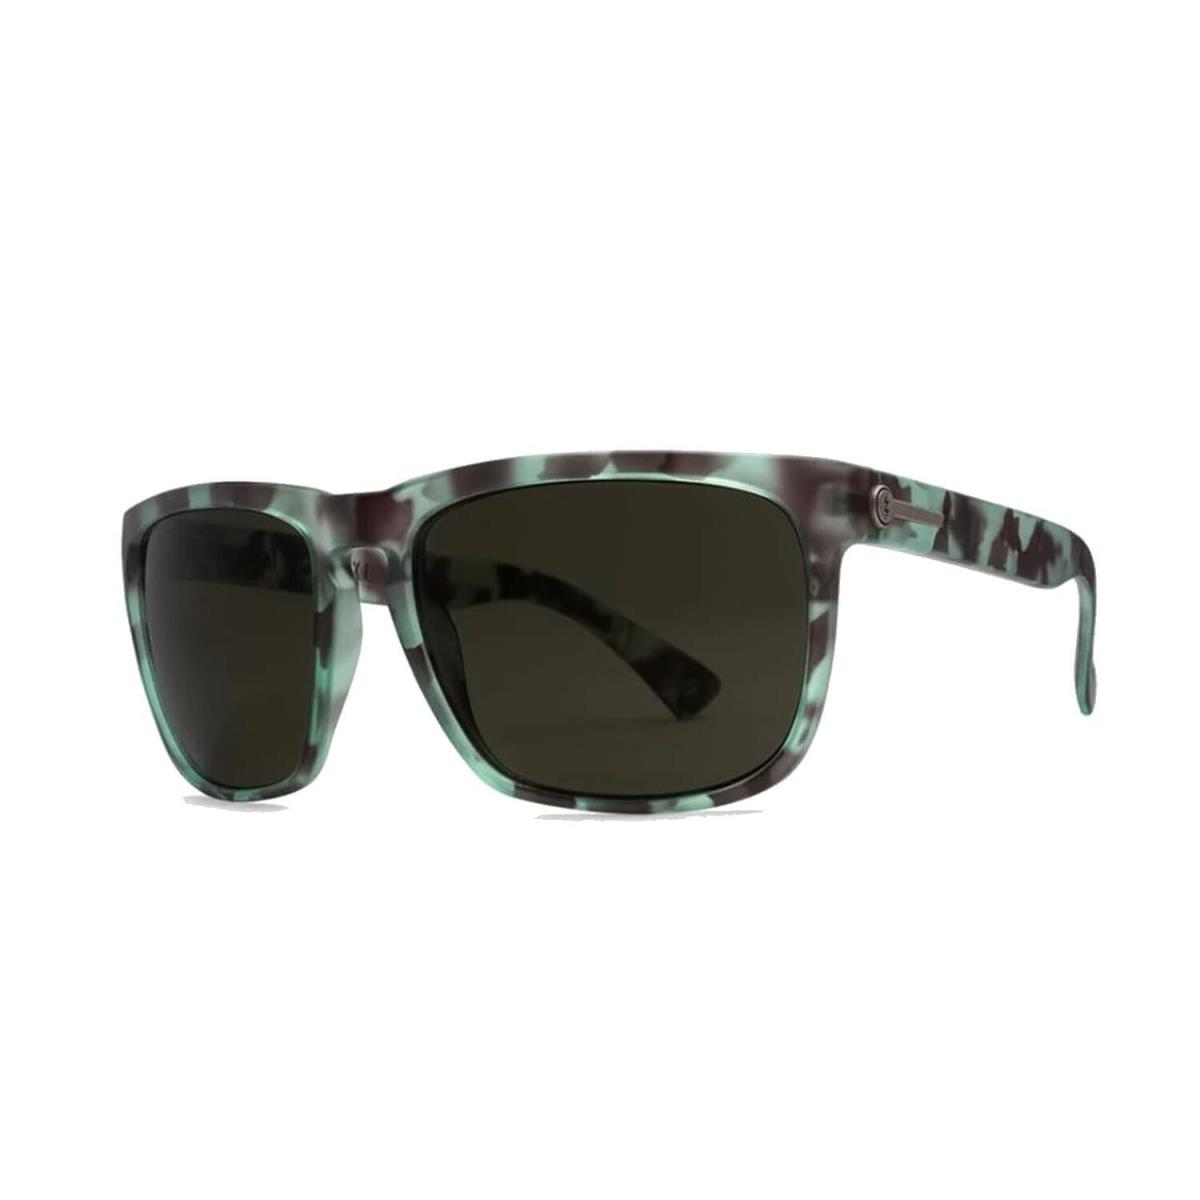 Electric Knoxville Sunglasses Gulf Tort with Grey Polarized Lens - Gulf Tort Frame, Grey Polarized Lens